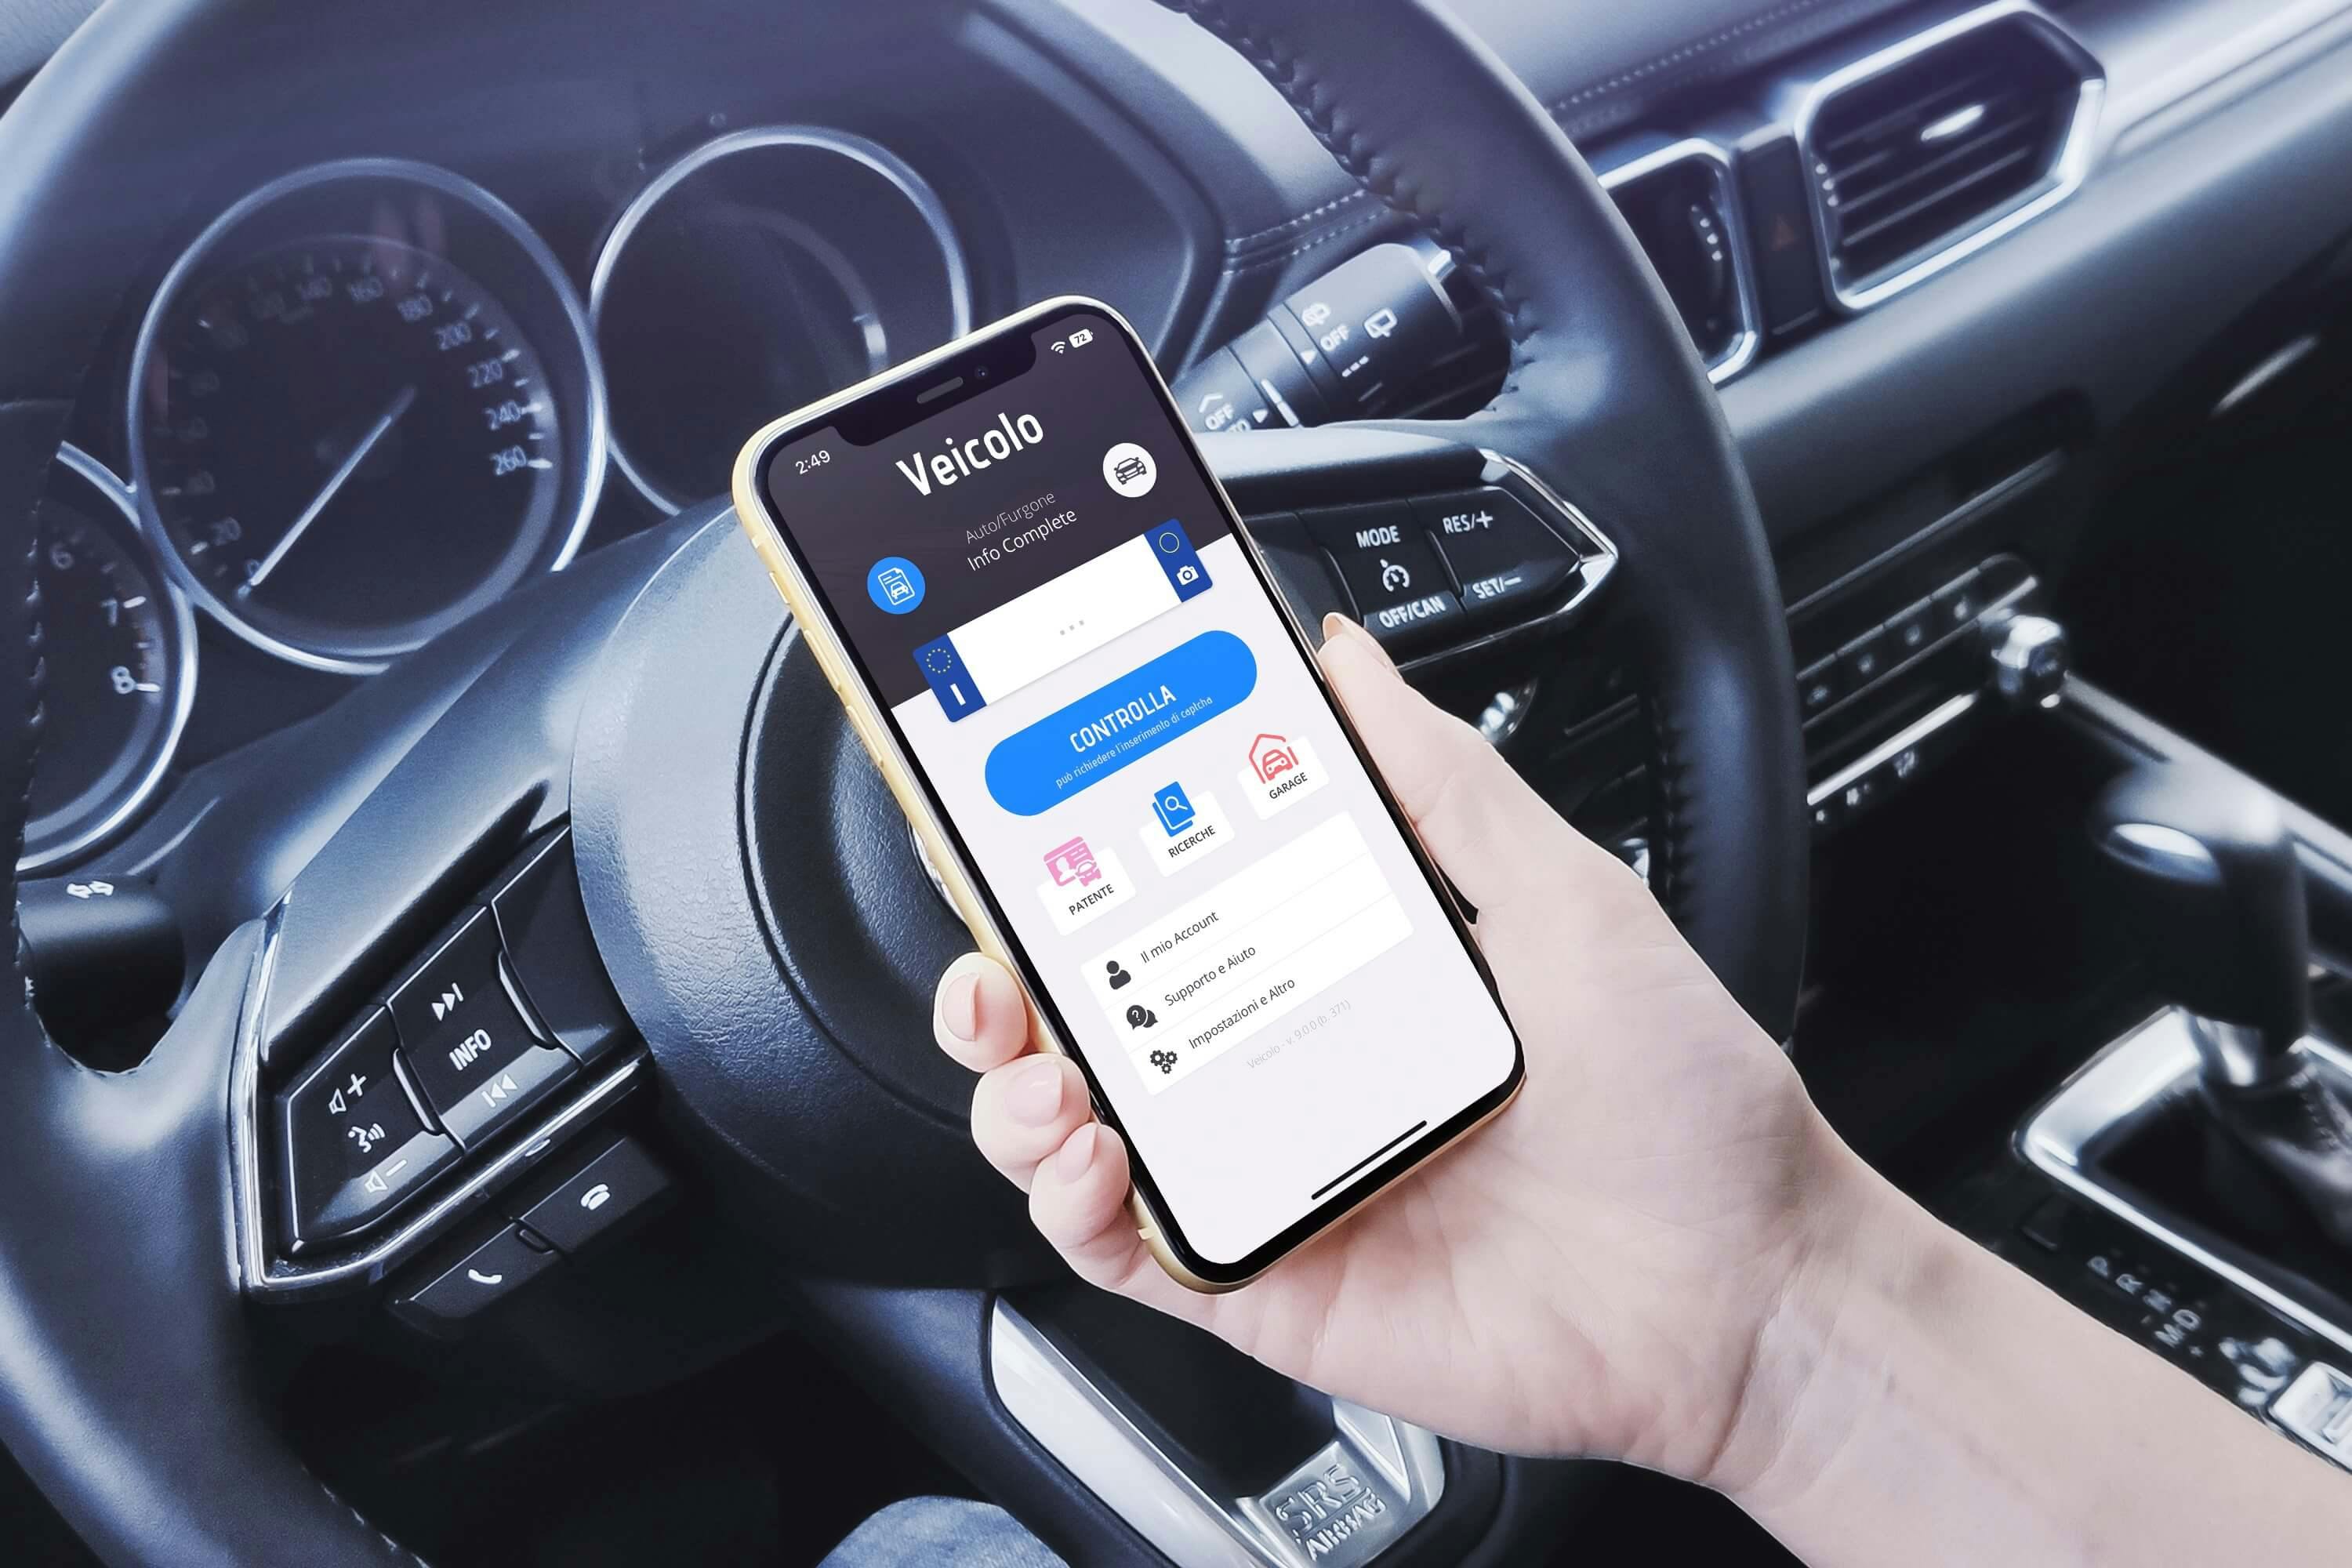 Veicolo - The app #1 in Italy to get information about a car. Downloaded more than 3 million times.